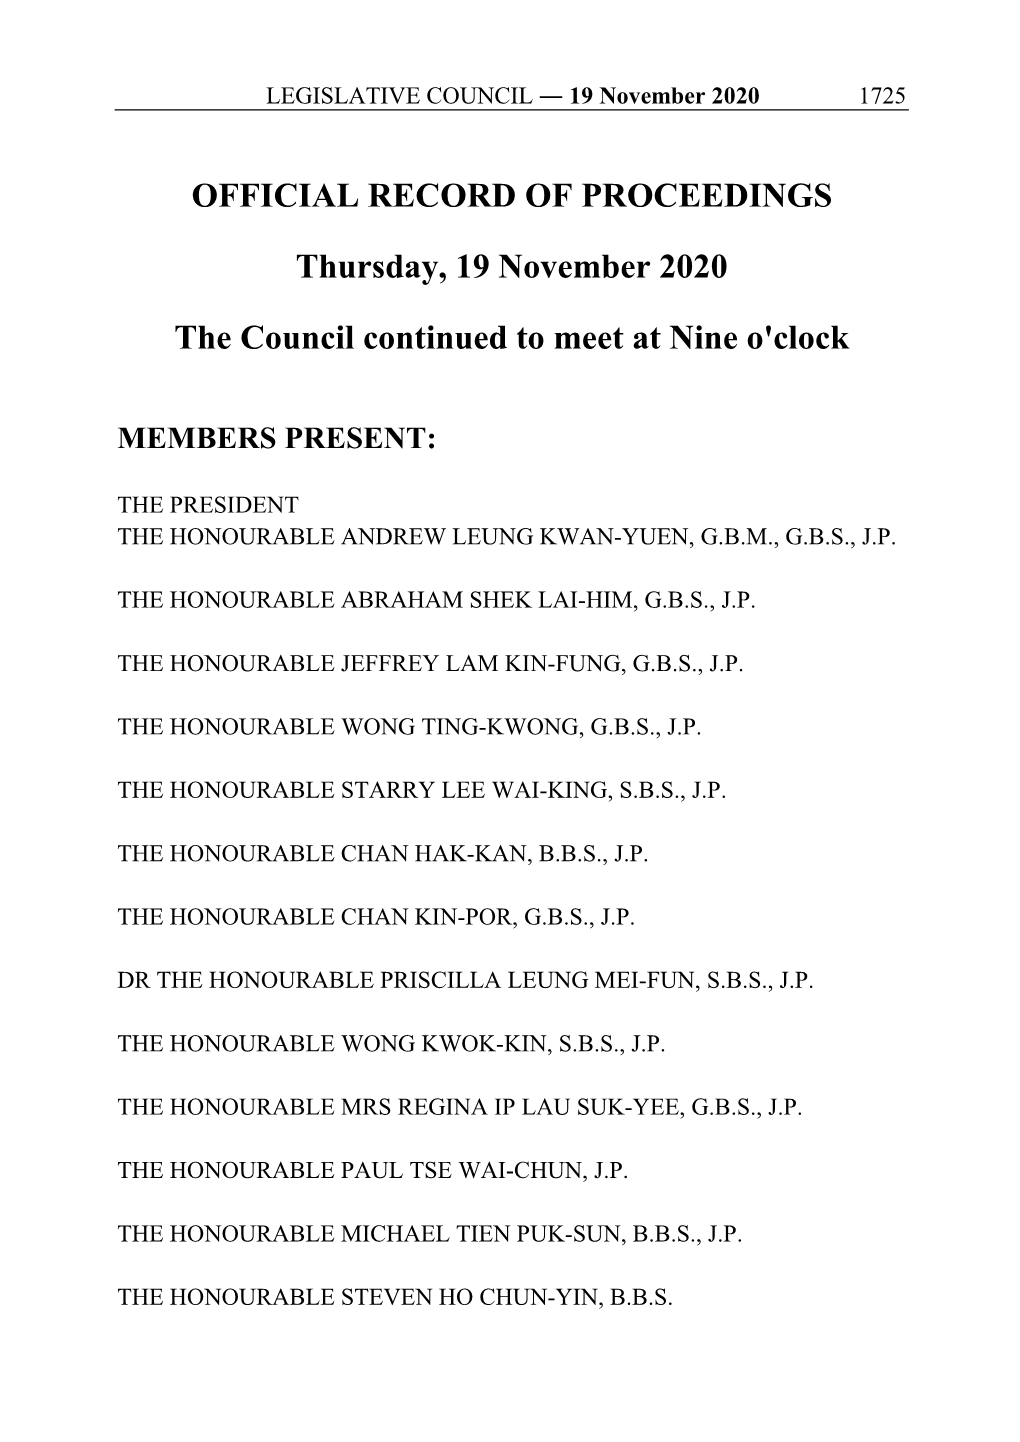 OFFICIAL RECORD of PROCEEDINGS Thursday, 19